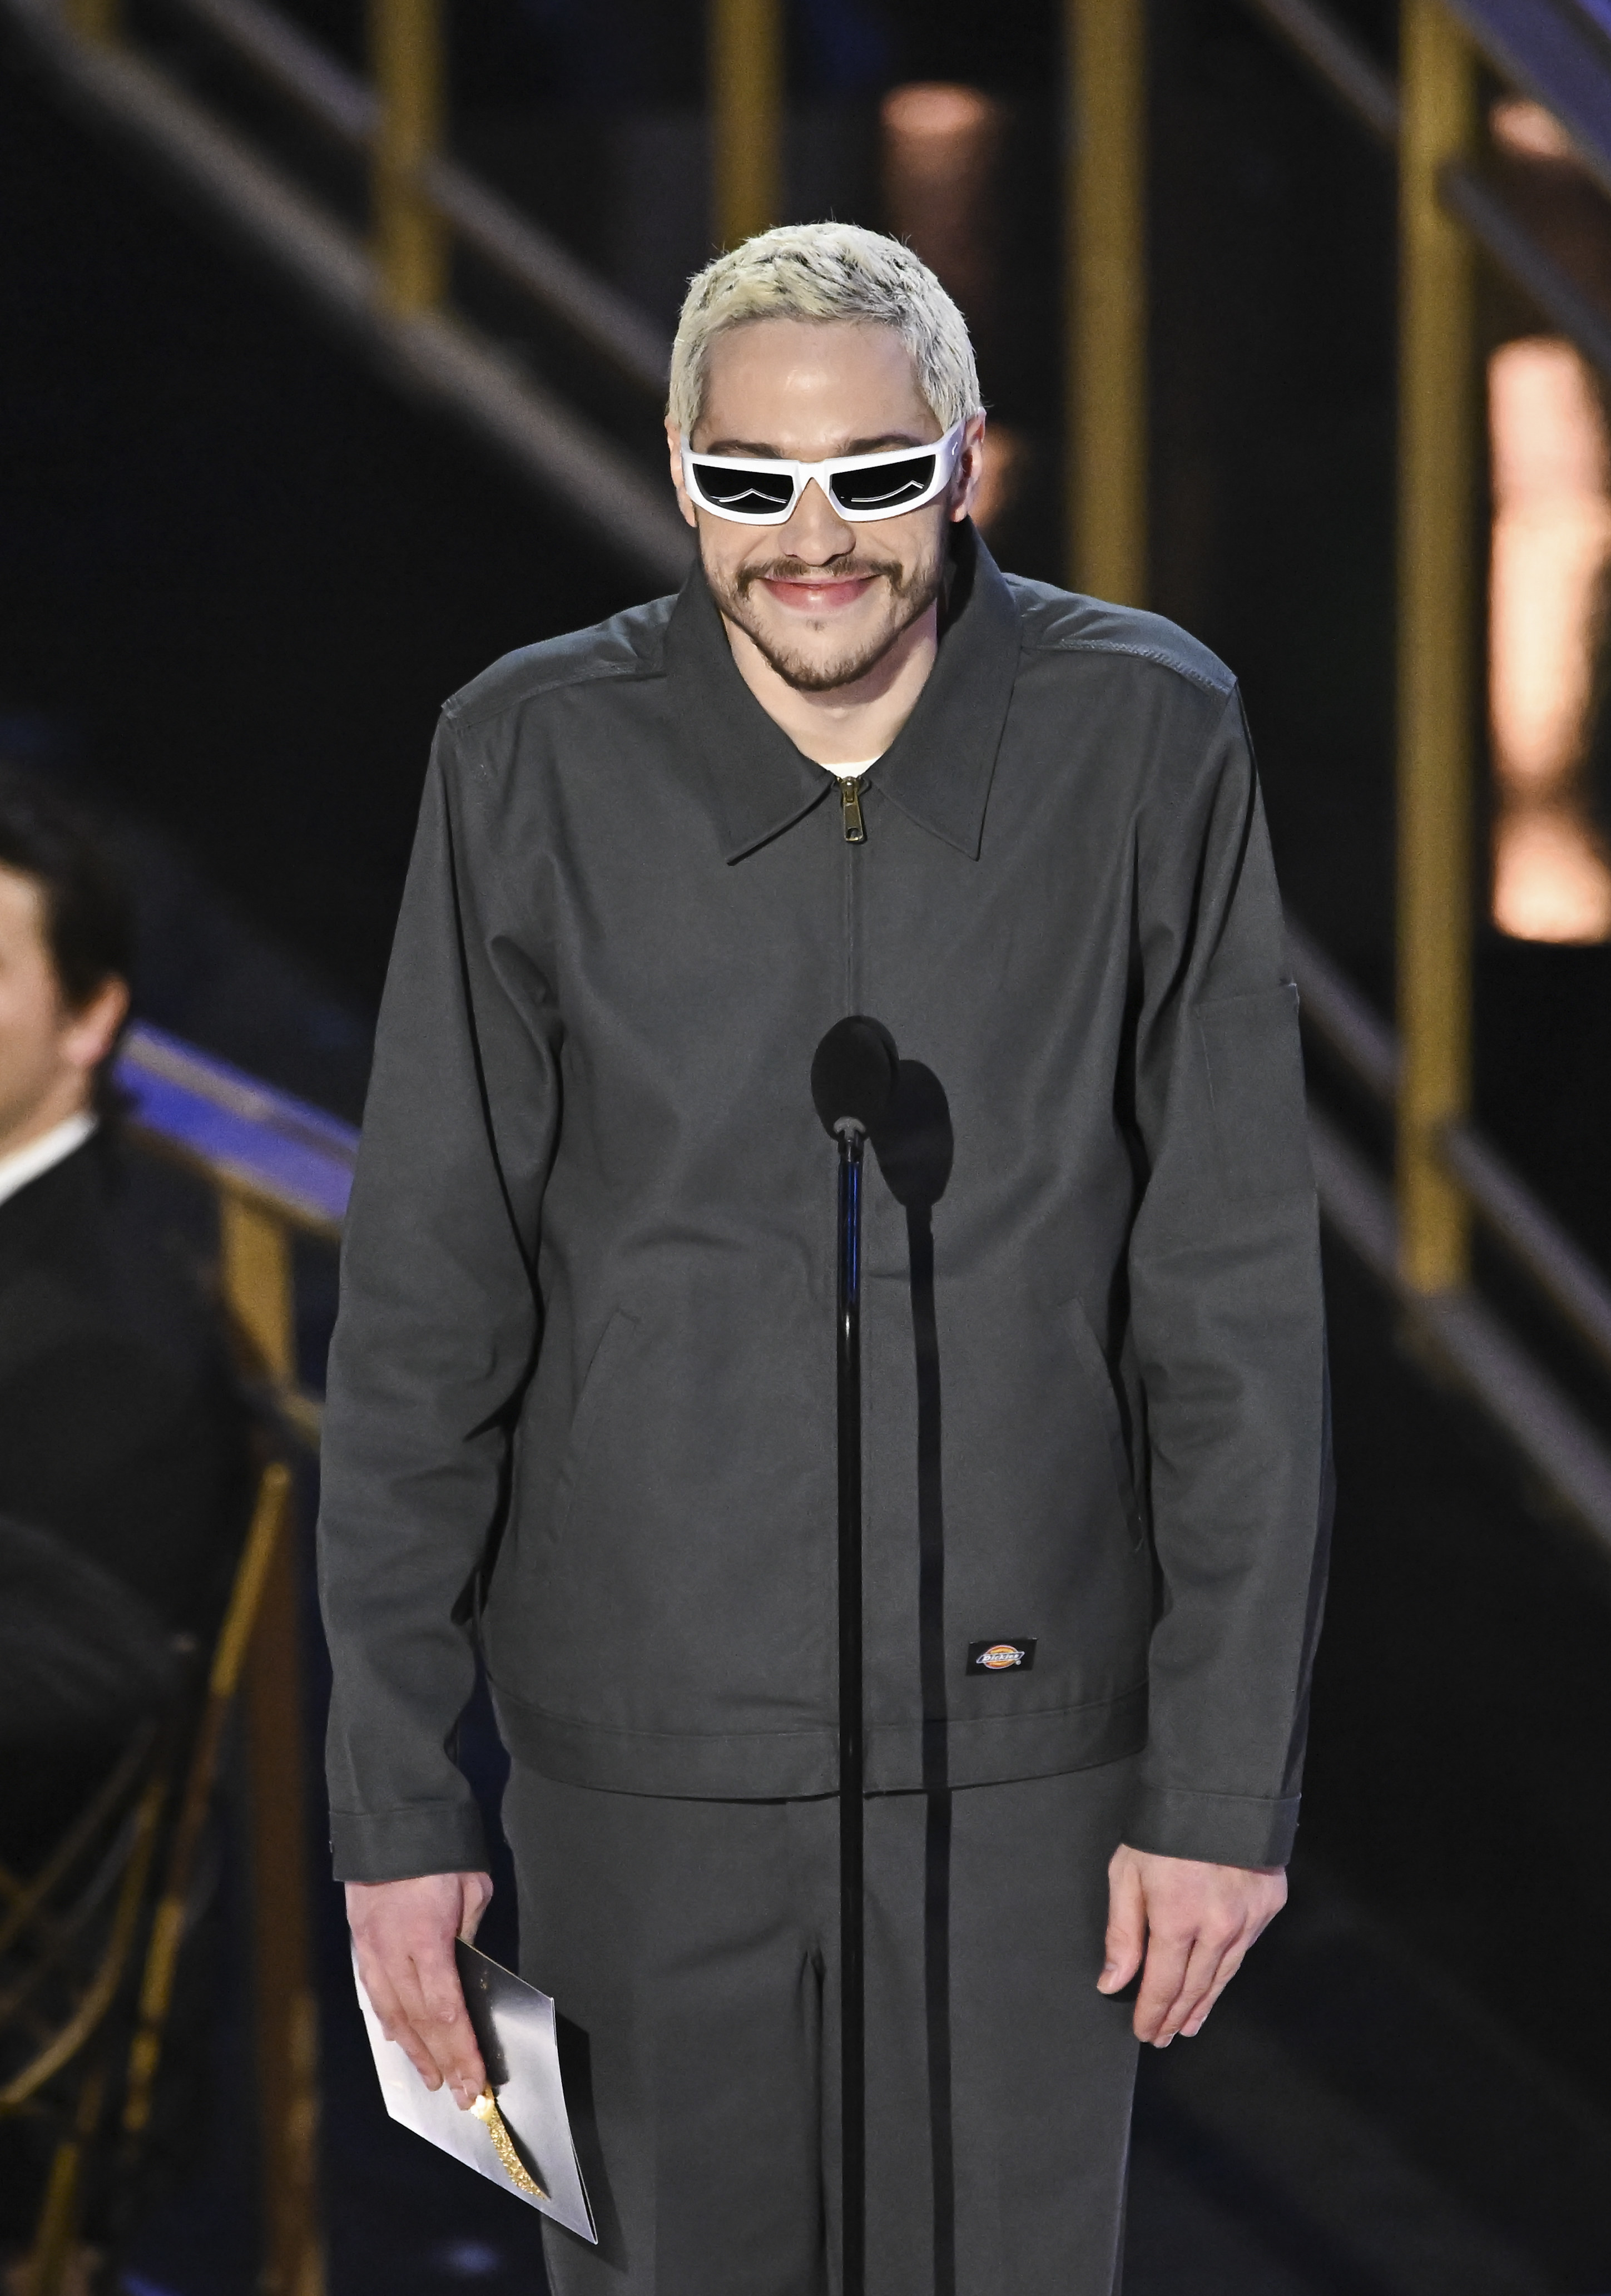 Pete wearing sunglasses and wearing a Ye-type suit